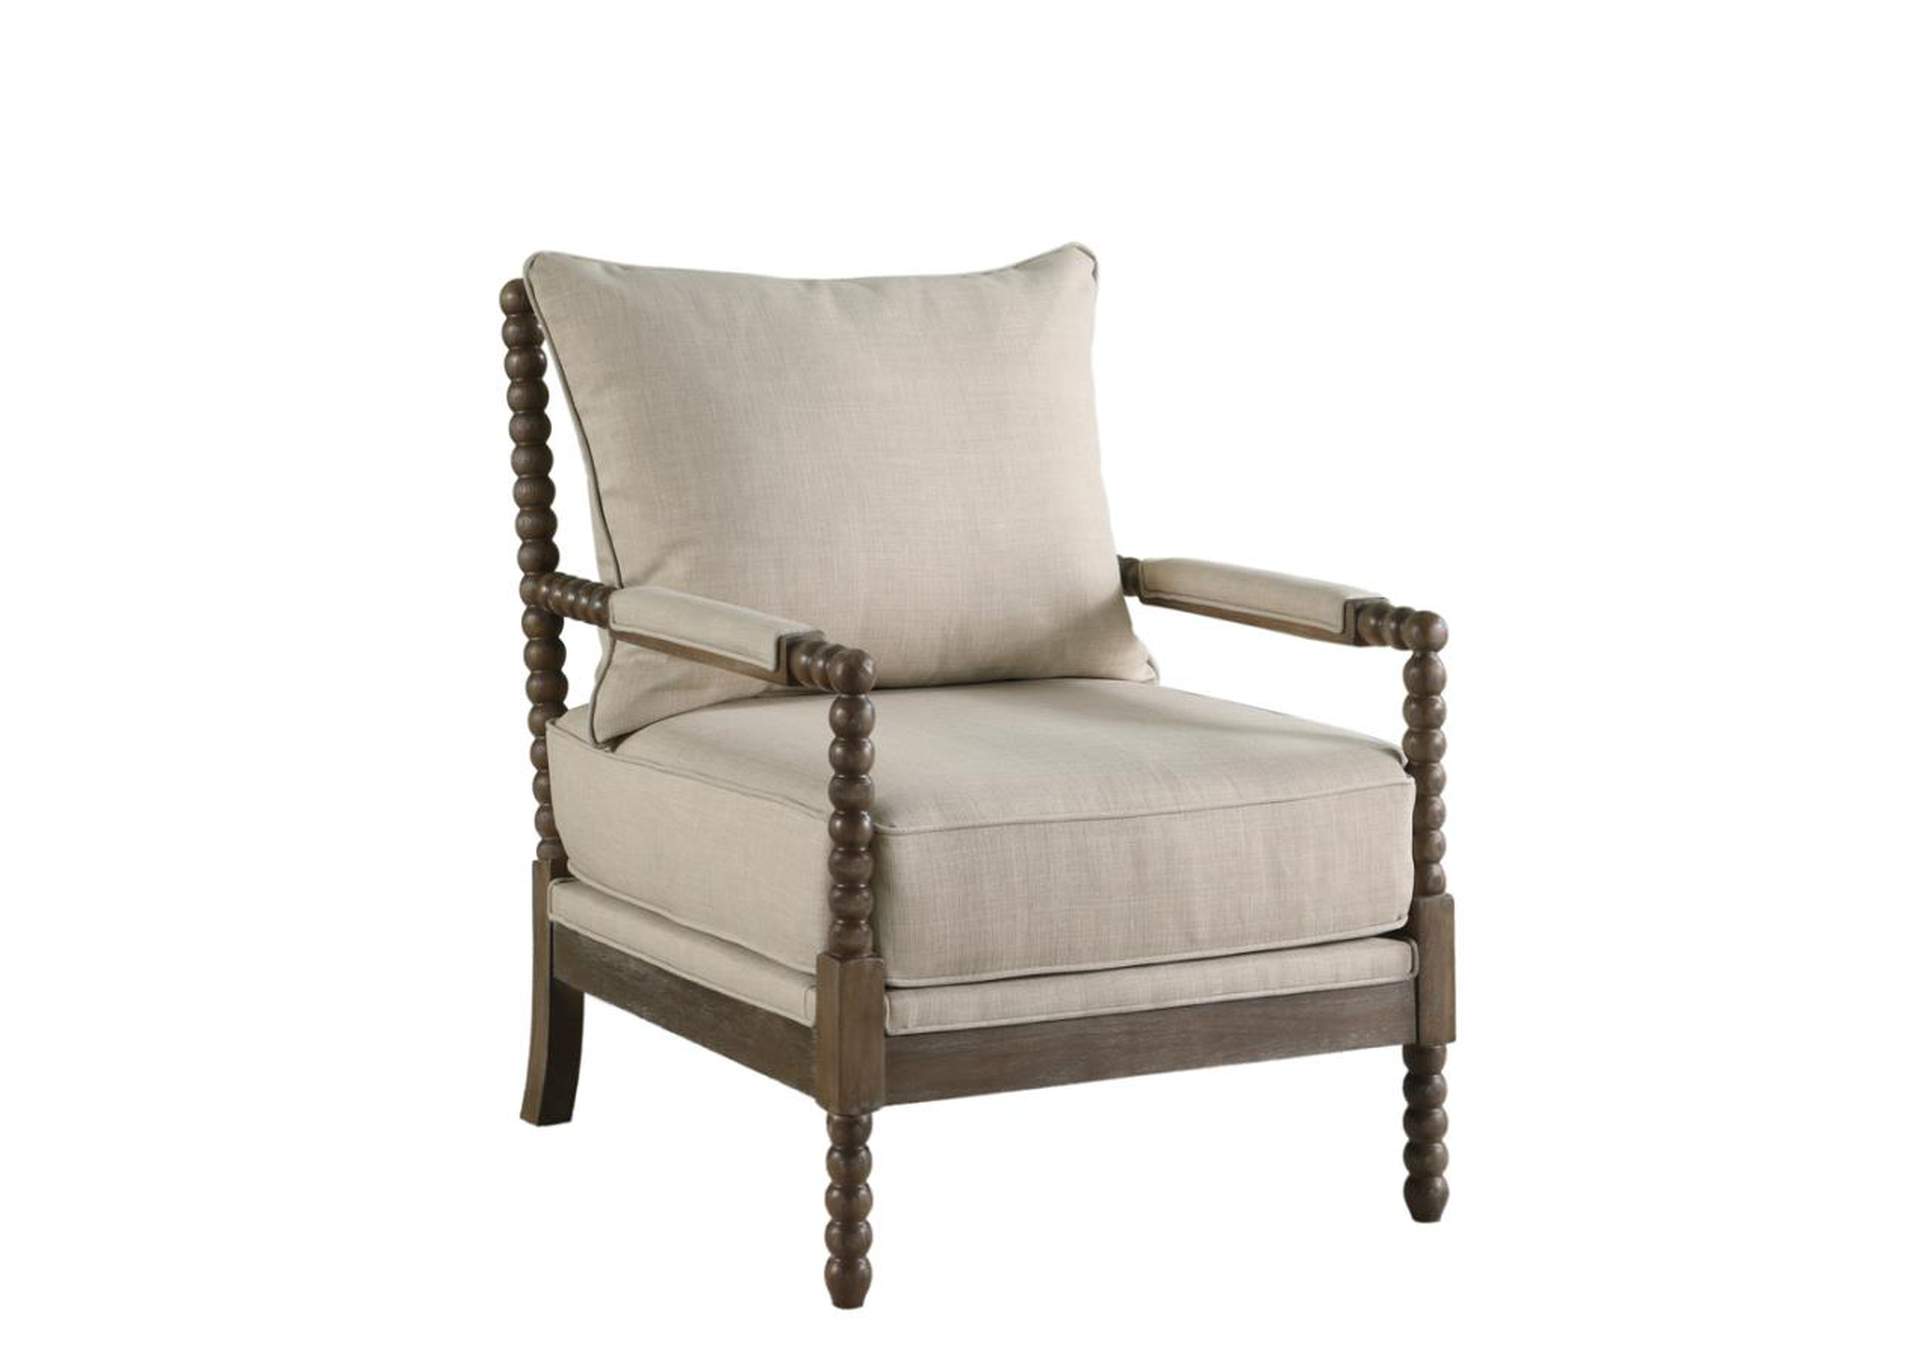 Blanchett Cushion Back Accent Chair Oatmeal and Natural,Coaster Furniture